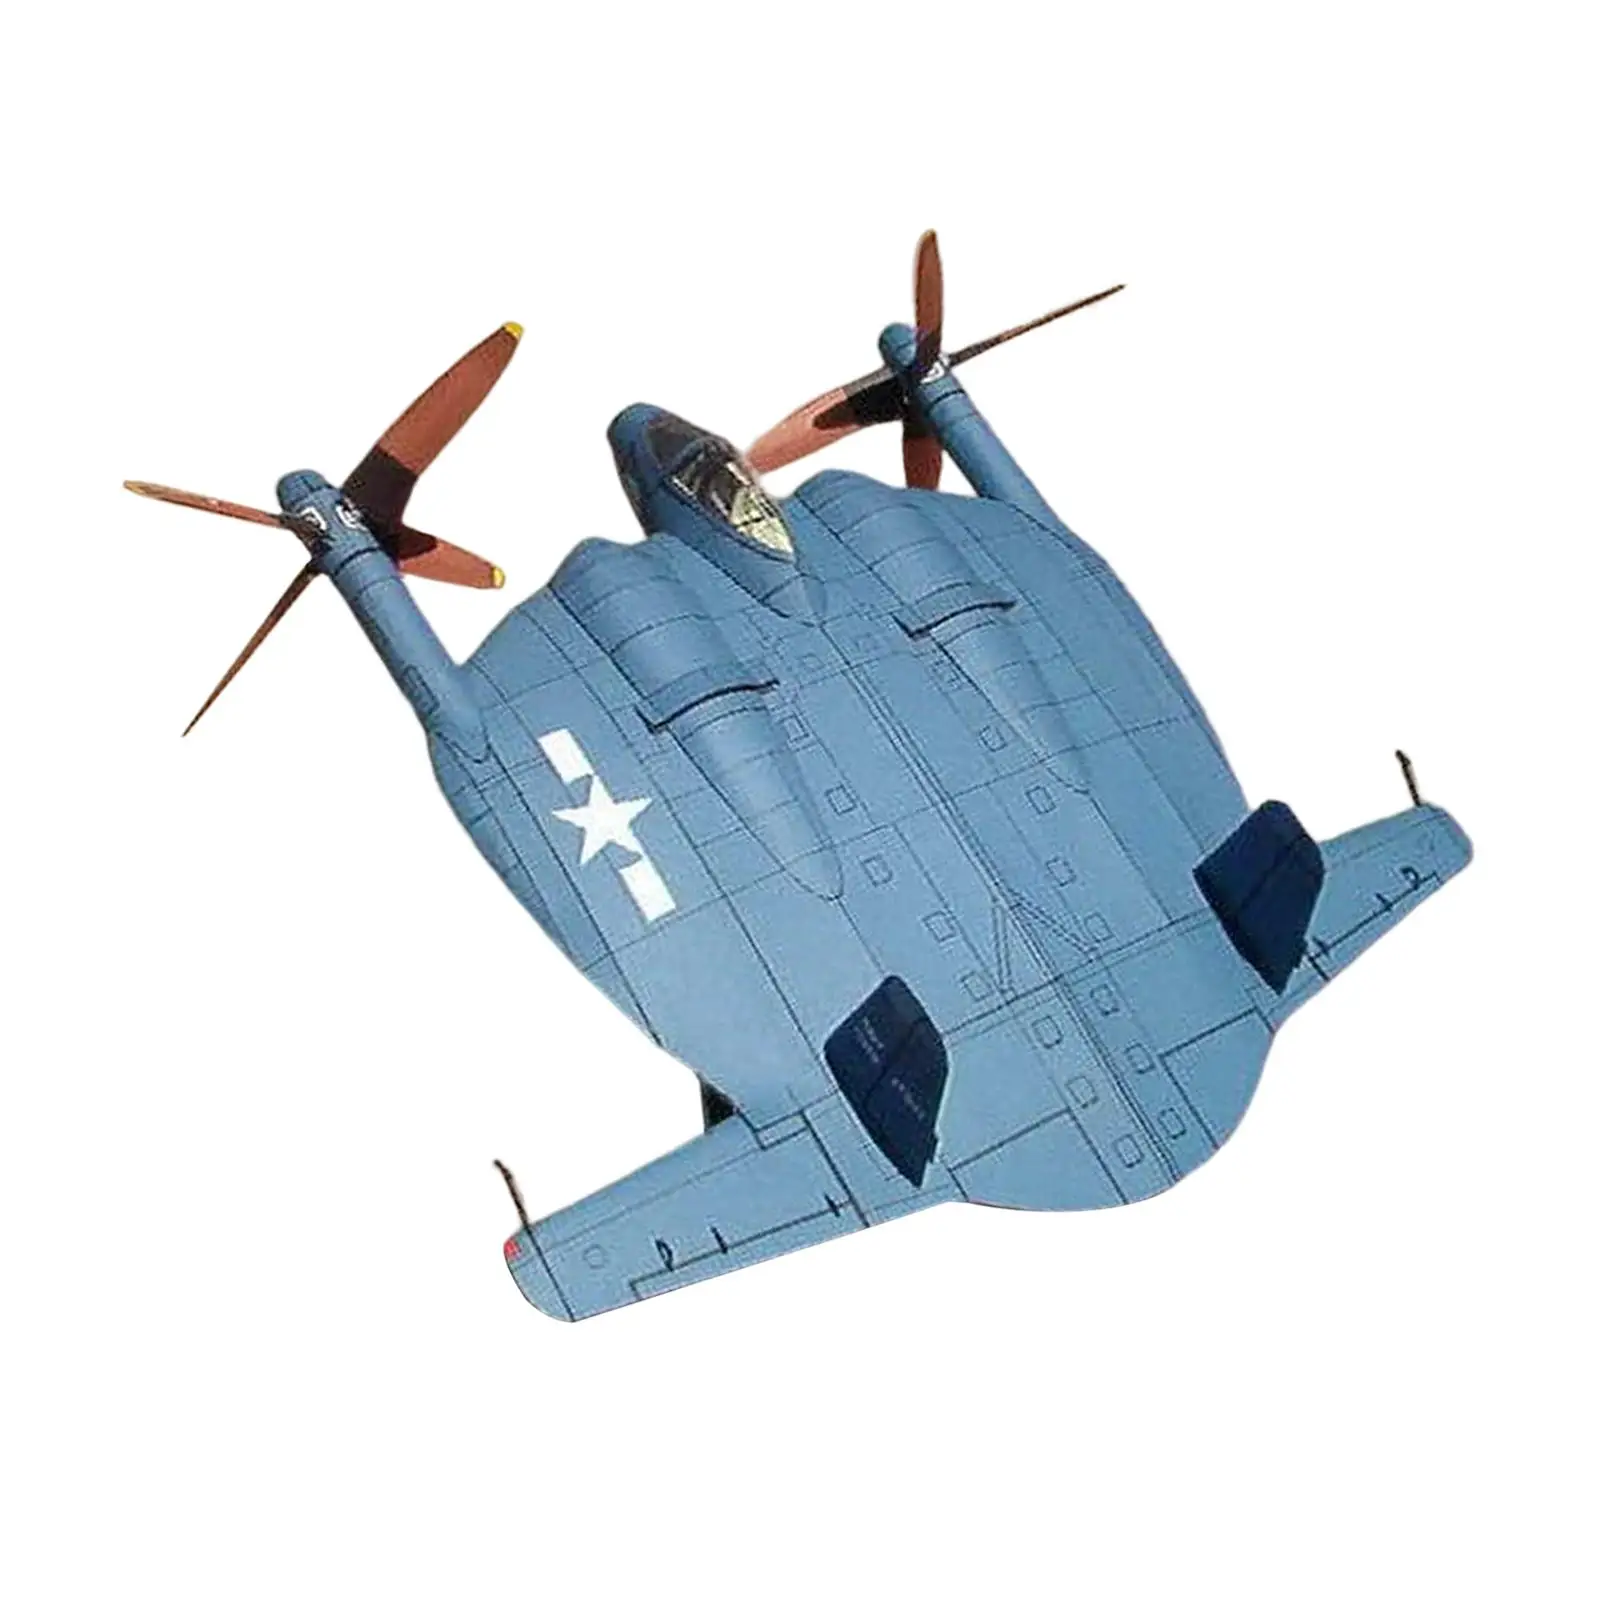 Air Aviation Fighter Aircraft Paper Model Miniature for Tabletop Collection